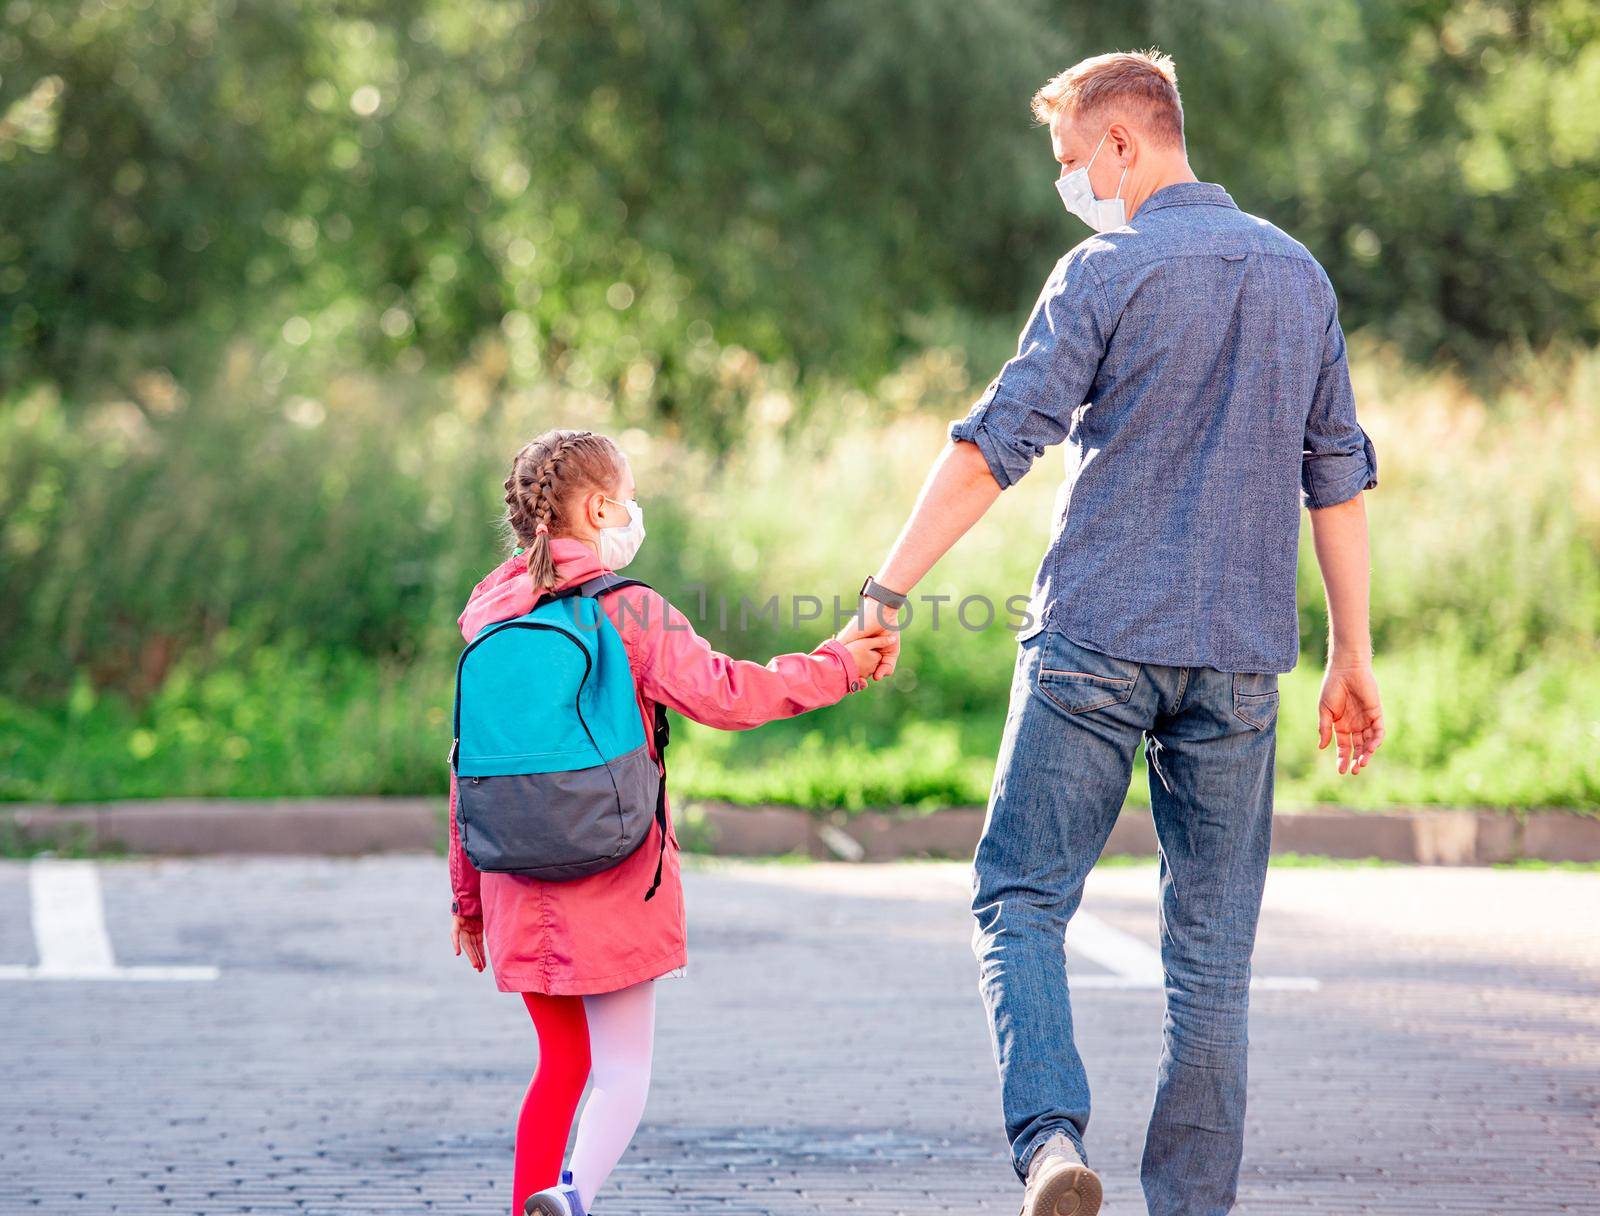 Daughter walking with father holding hands after school during coronavirus pandemic